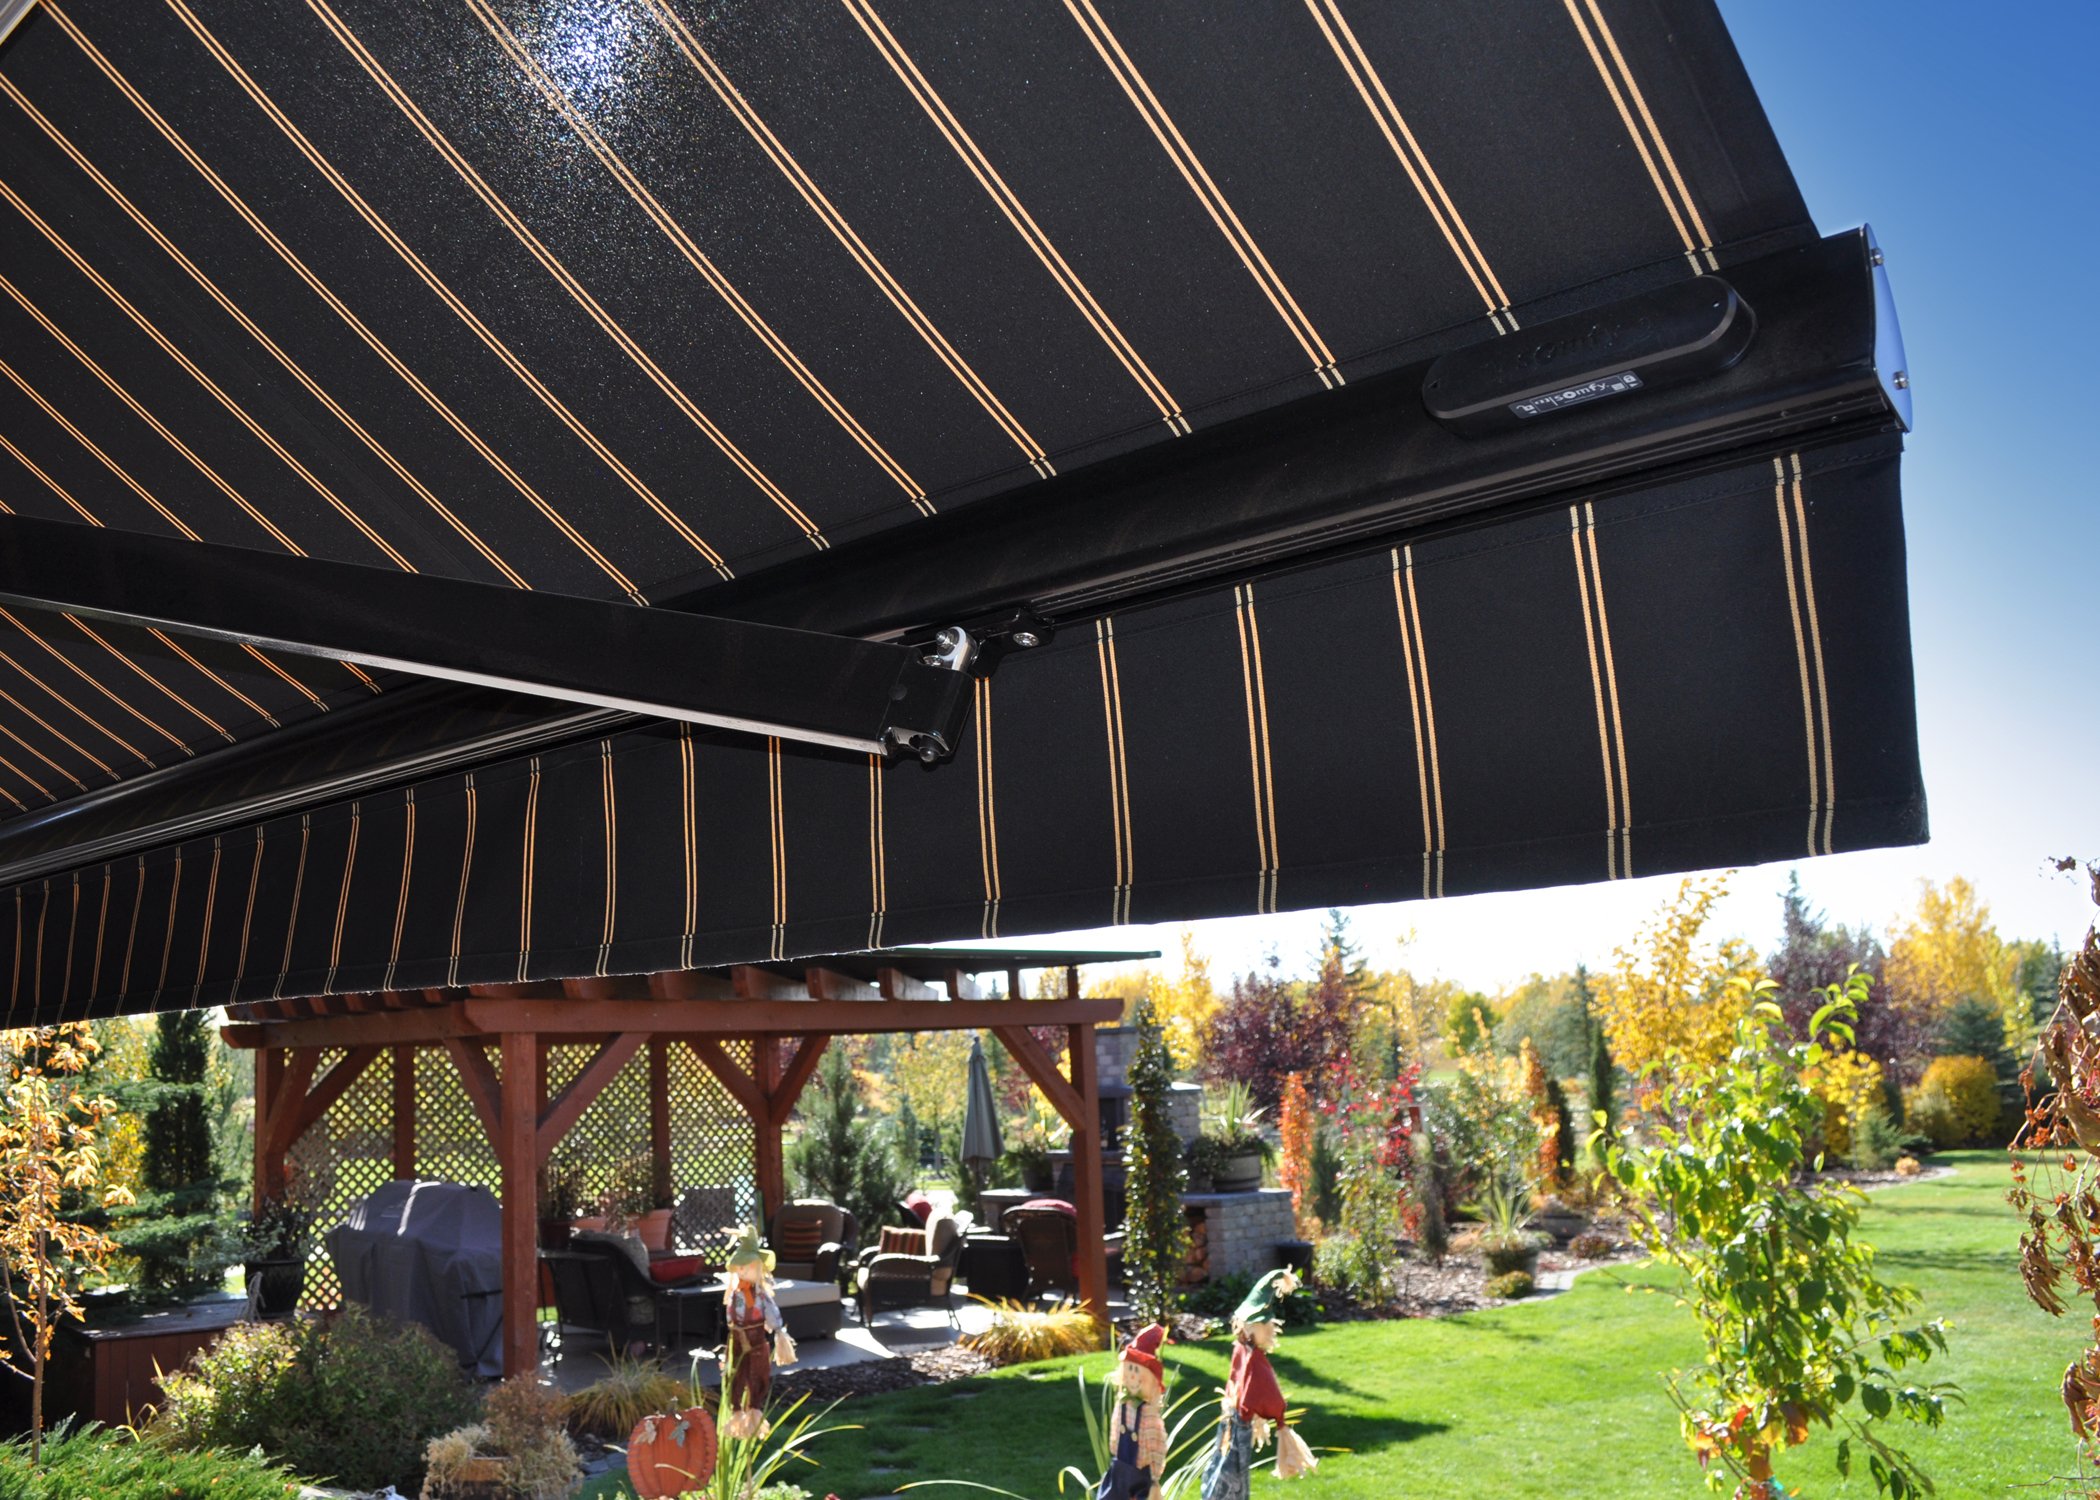 calgary-awnings-projects4.jpg